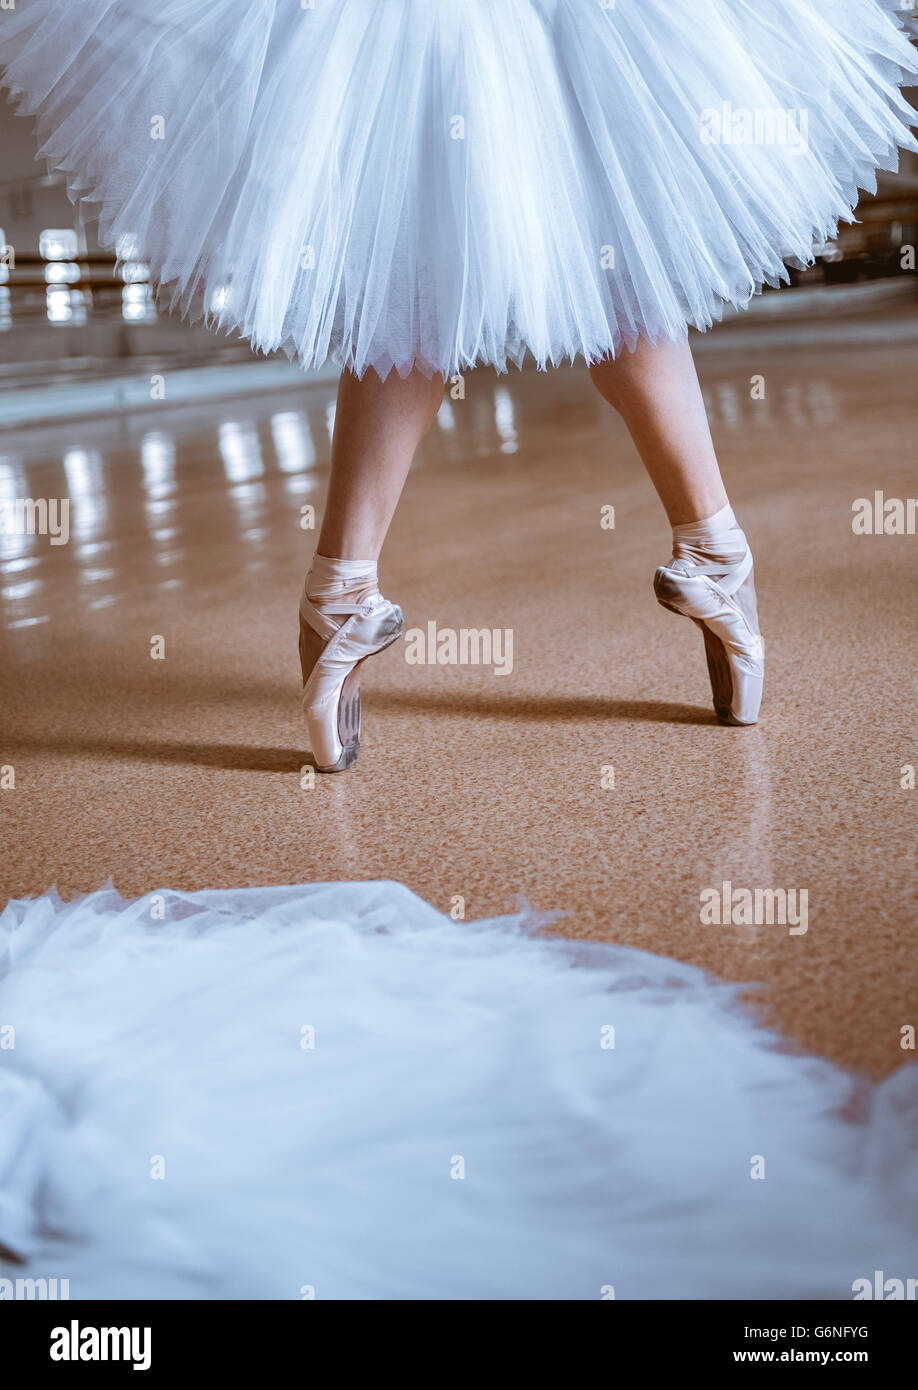 The close-up feet of young ballerina in pointe shoes Stock Photo